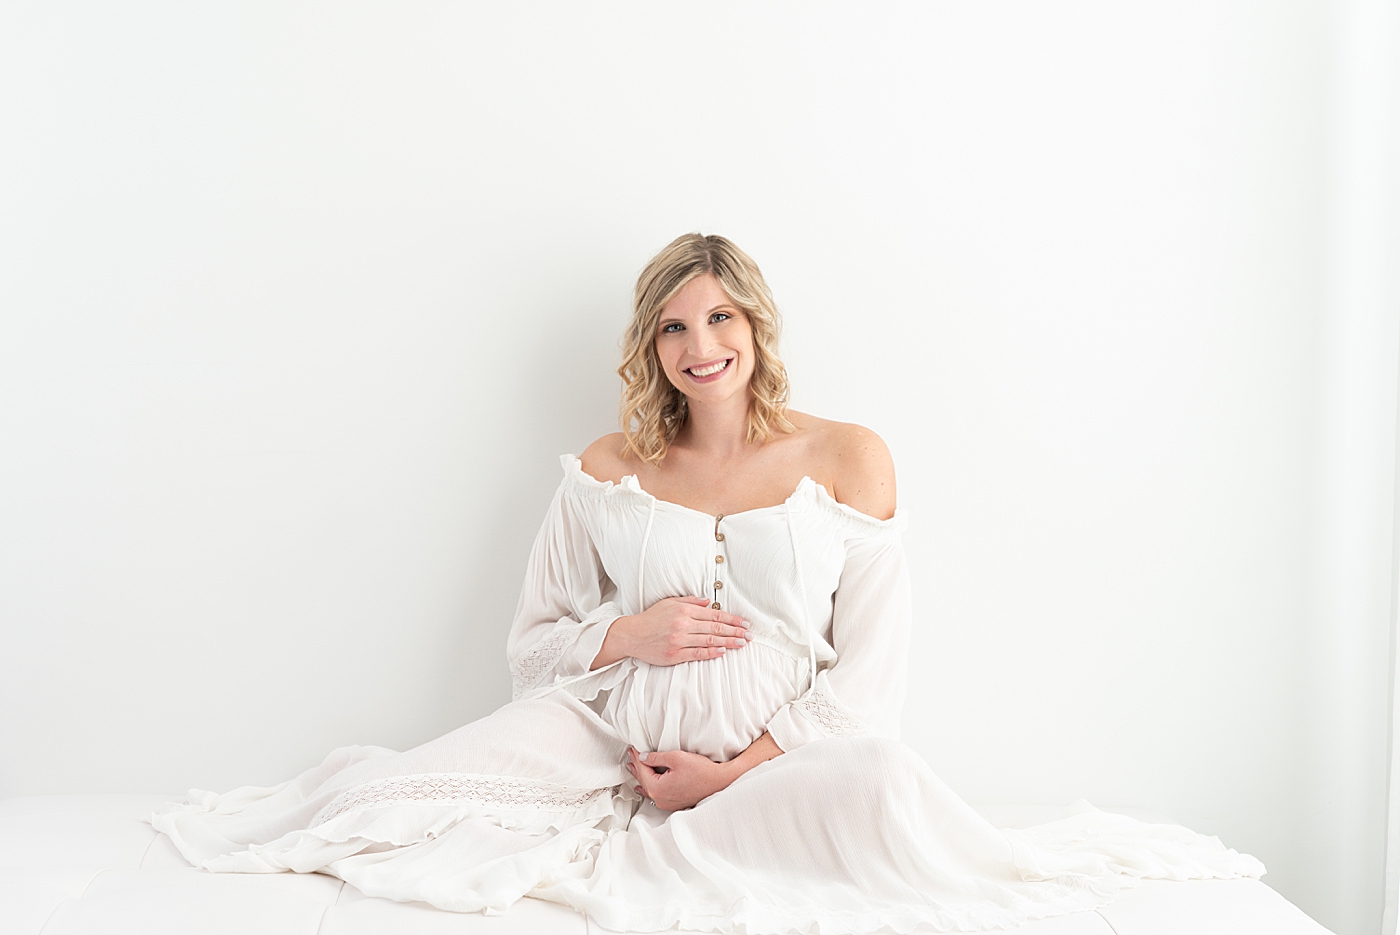 Studio Maternity Session in Chagrin Falls. Photos by Rachel Brookes Photography.